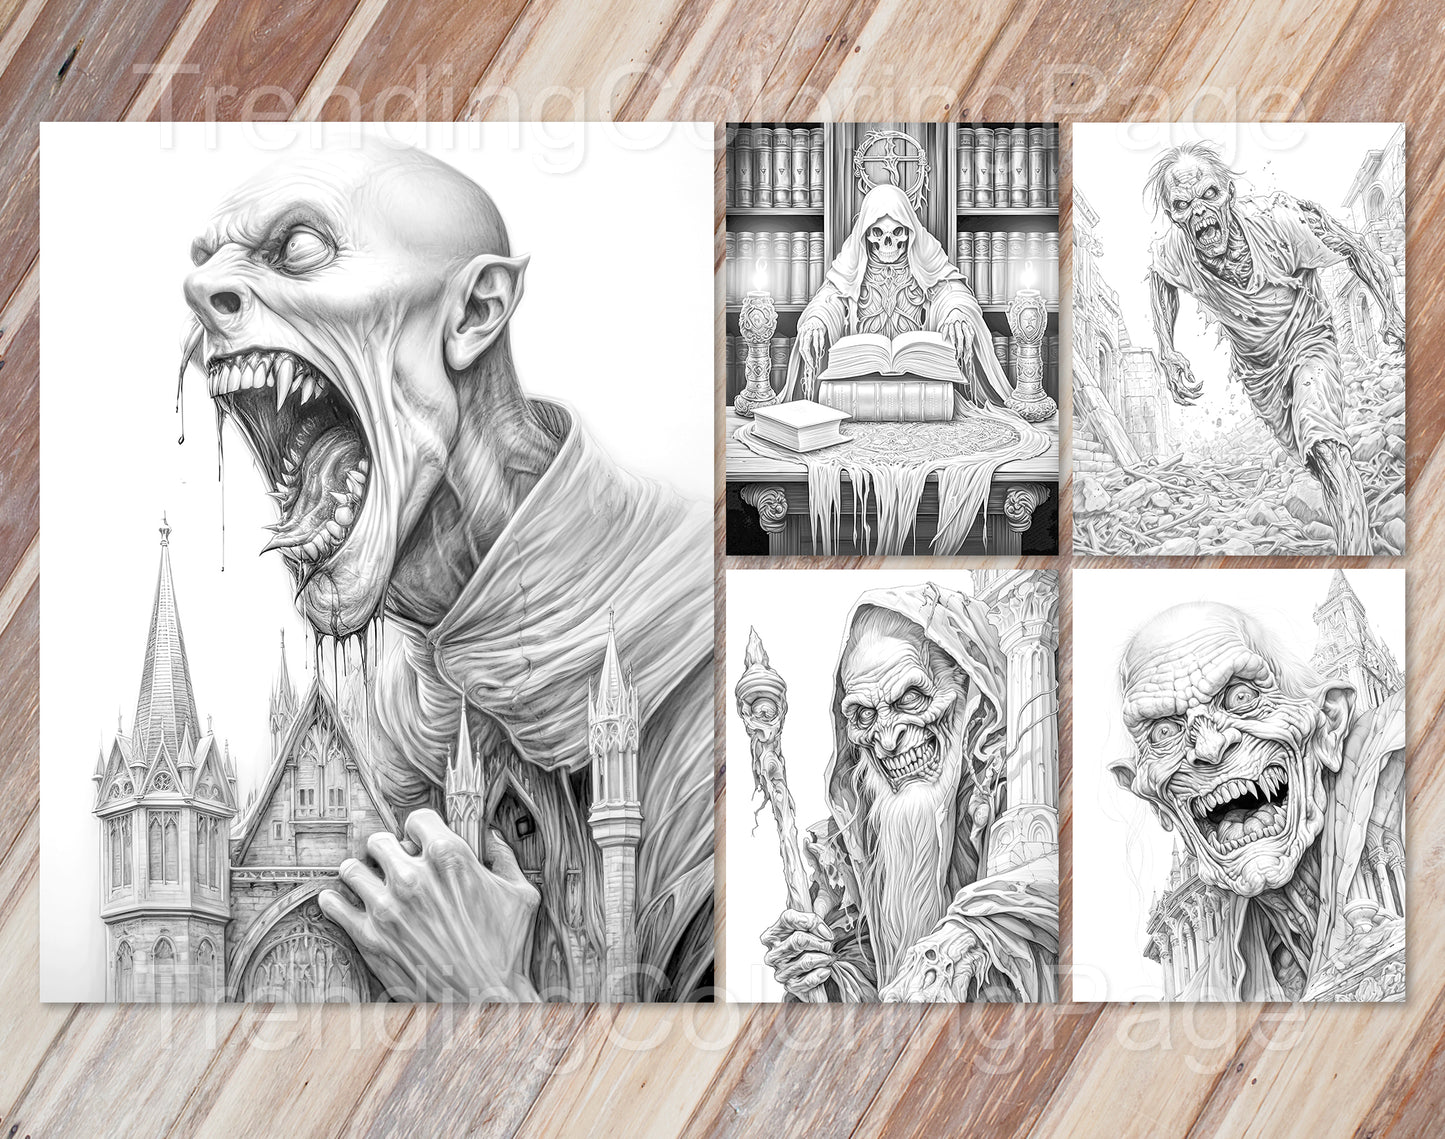 40 Freak of Horror Grayscale Coloring Pages - Halloween Coloring - Instant Download - Printable PDF Dark/Light